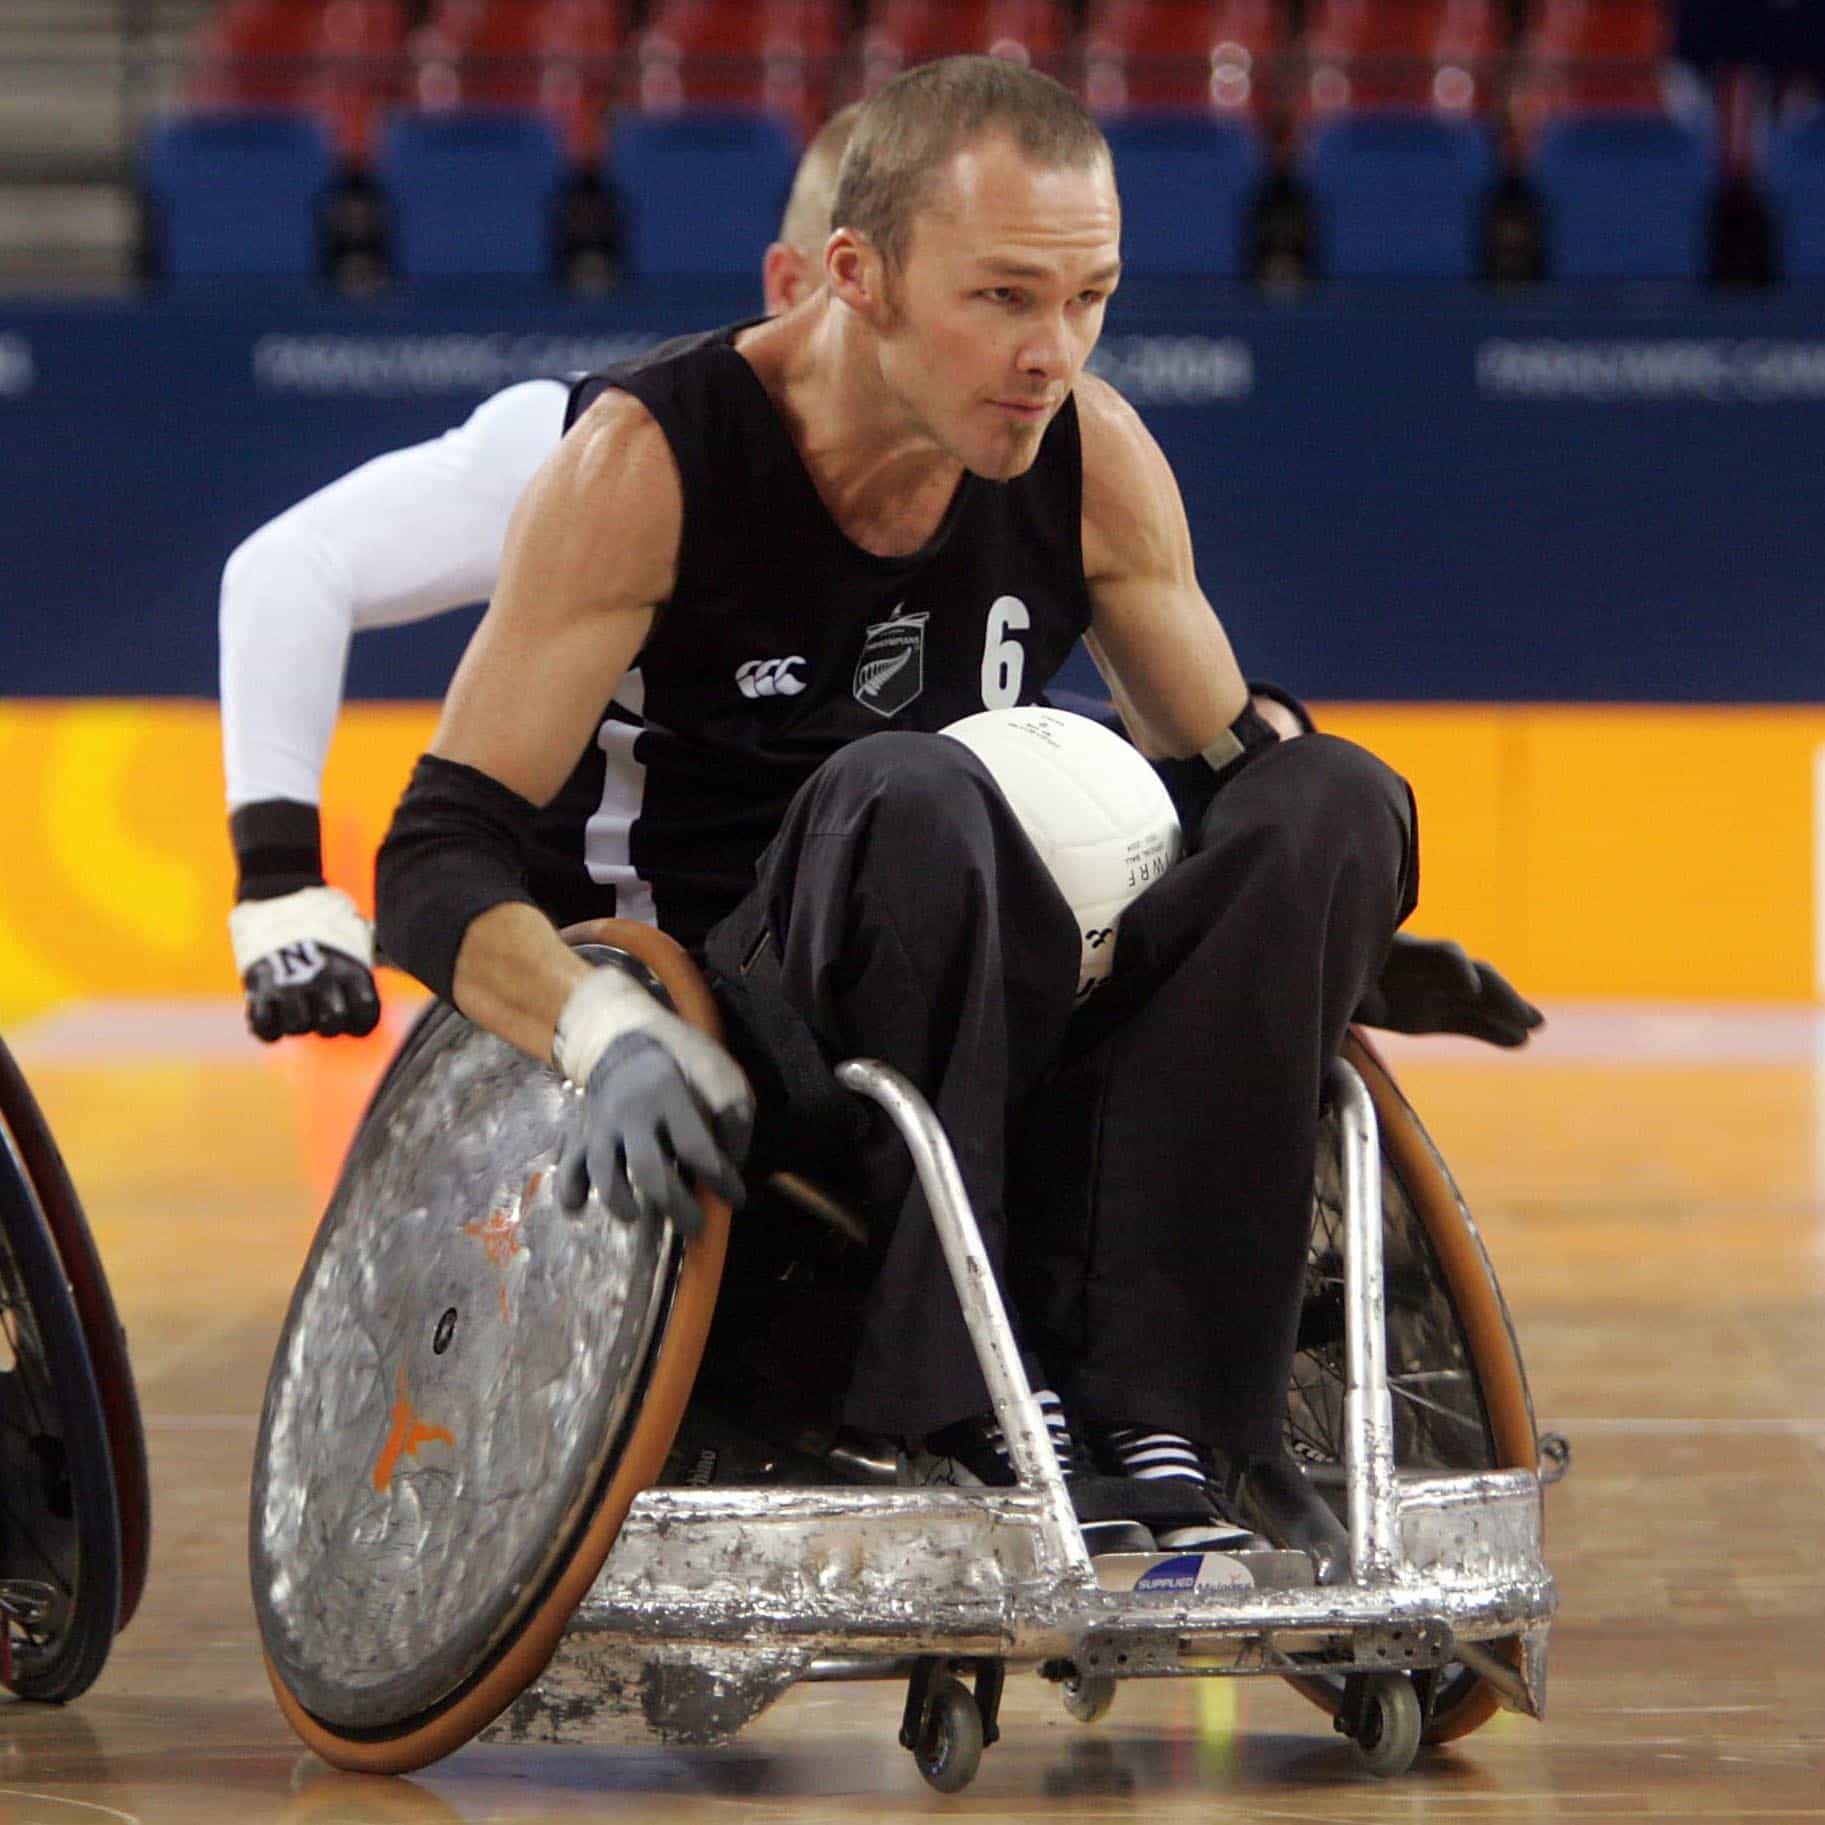 Gery Tinker during the Wheelchair Rugby match between USA and New Zealand at the Indoor Arena, Athens, Greece on Monday, 20 September, 2004. The Wheelblacks lost the match, 32 - 35.
PHOTO: Hannah Johnston/PHOTOSPORT